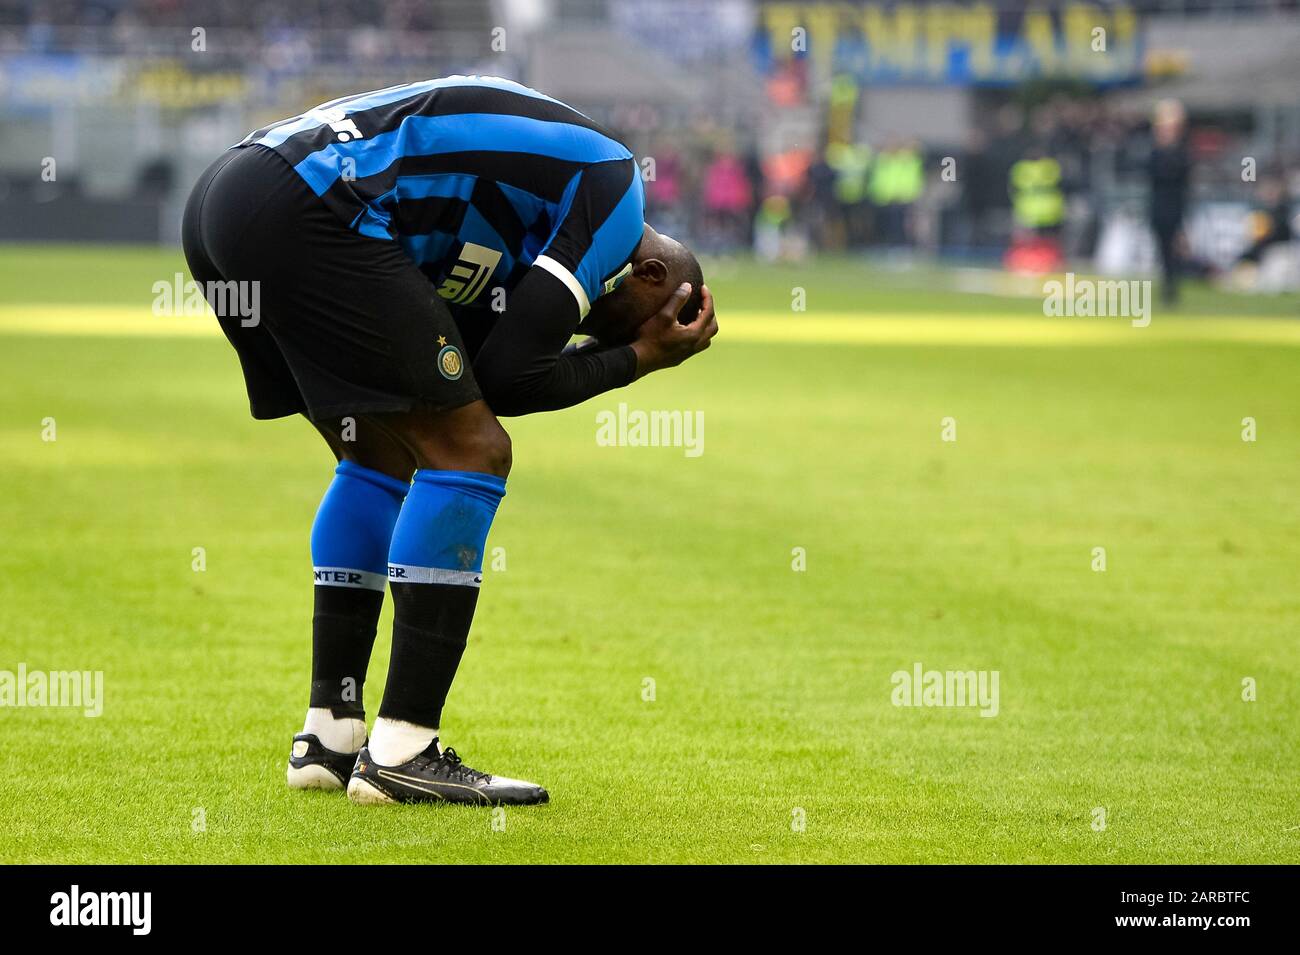 Milan, Italy - 26 January, 2020: Romelu Lukaku of FC Internazionale looks dejected during the Serie A football match between FC Internazionale and Cagliari Calcio. Credit: Nicolò Campo/Alamy Live News Stock Photo